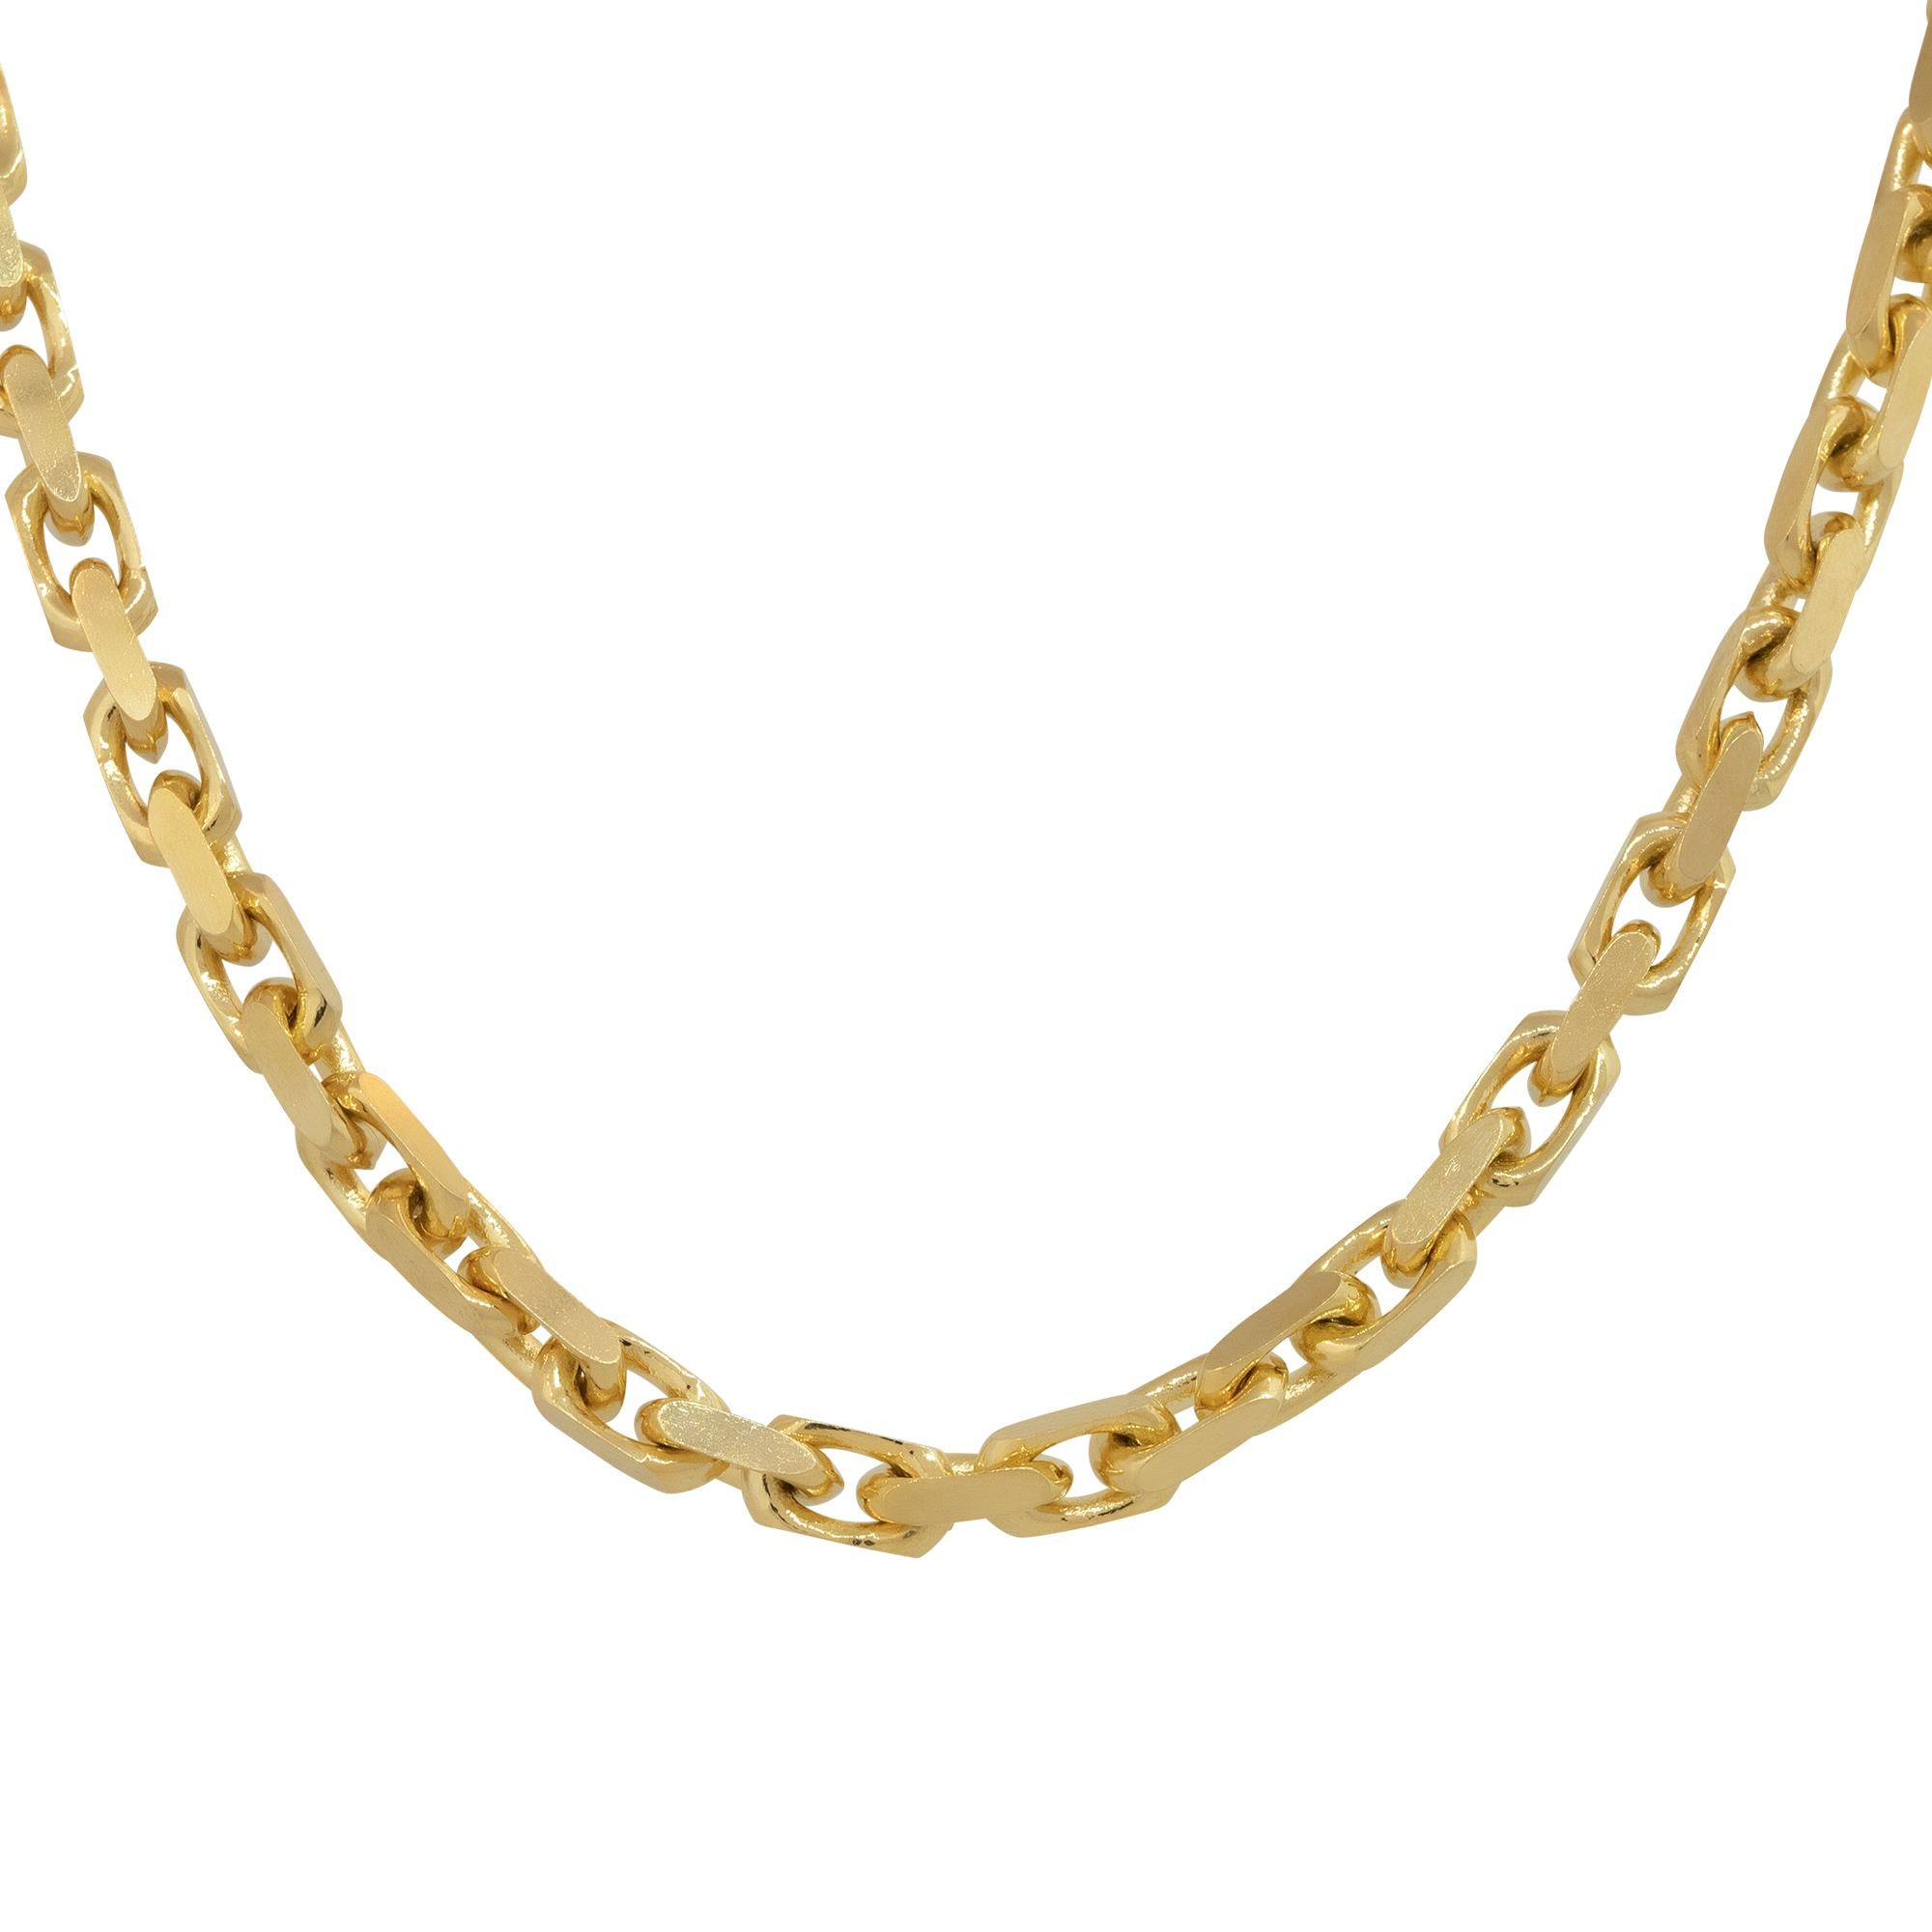 14k Yellow Gold 22″ Men's H-Link Chain

Material: 14k Yellow Gold
Measurements: Necklace Measures 22″ in Length and 4.7mm in Thickness
Fastening: Spring Ring Clasp
Item Weight: 60.2g (38.7dwt)
Additional Details: This item comes with a presentation